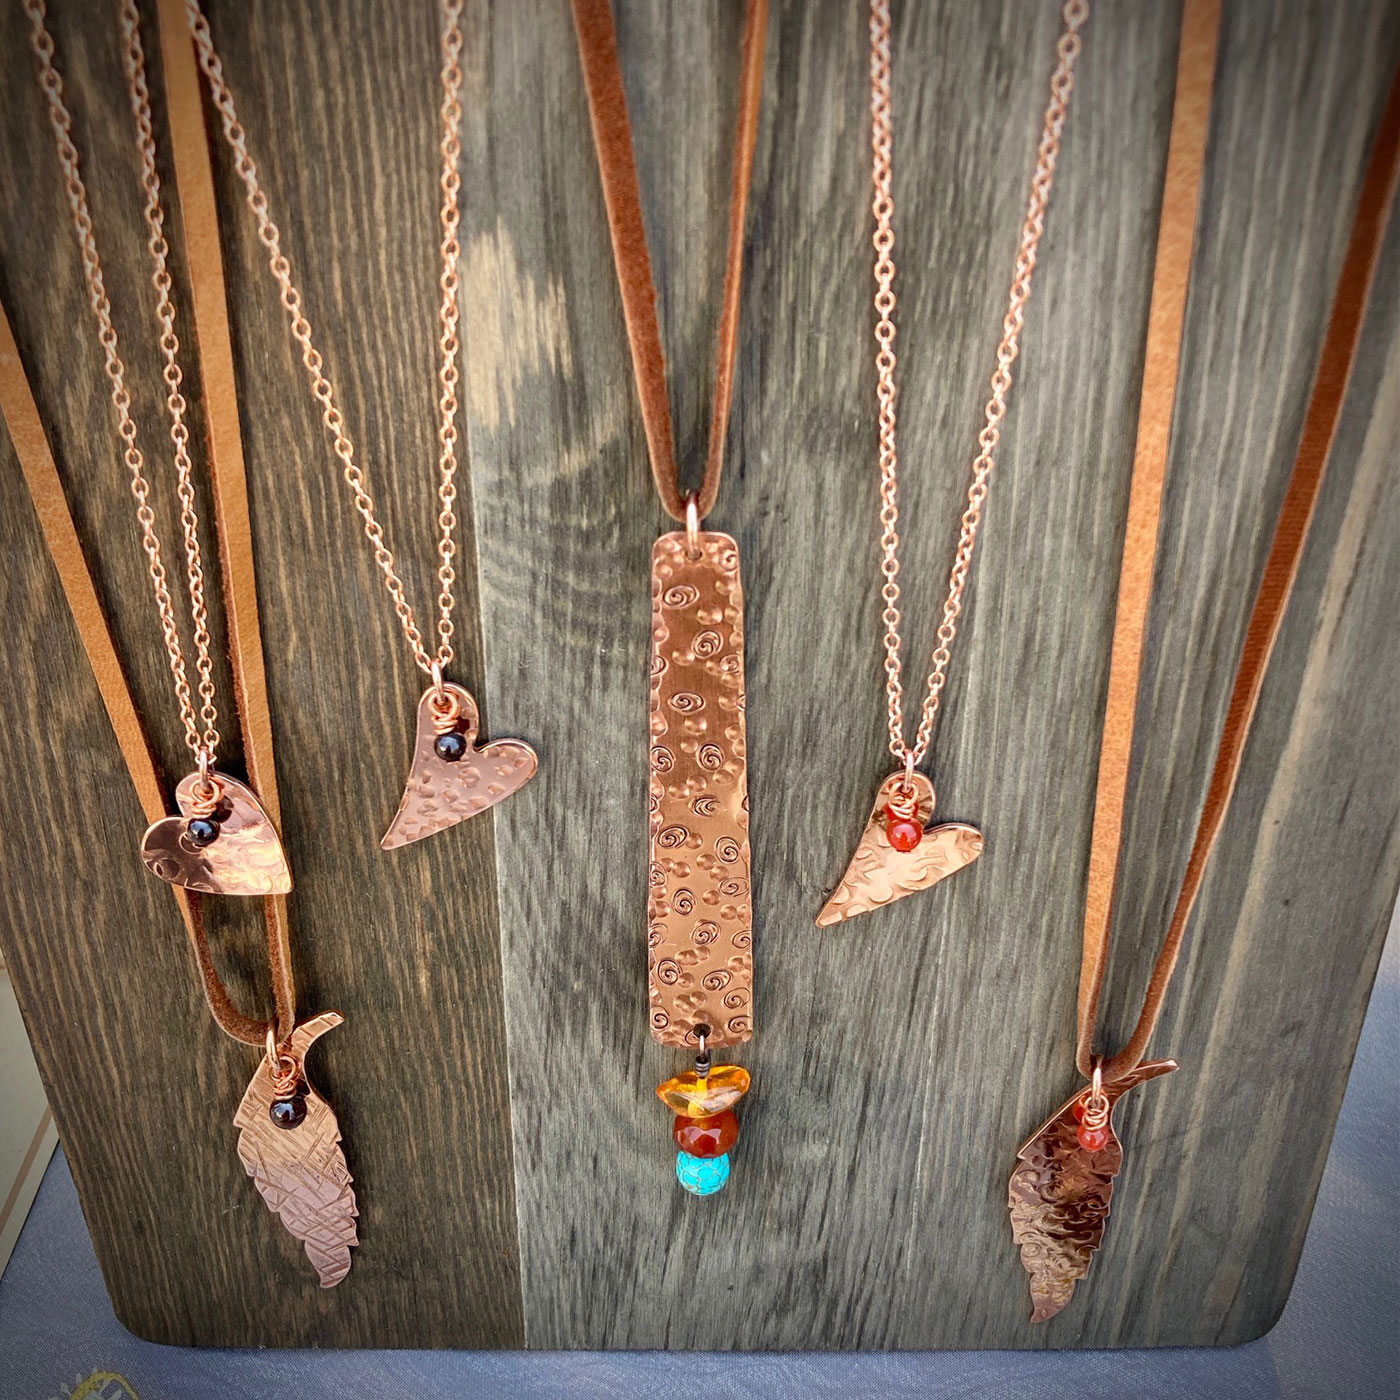 Necklaces on display at Roche Harbor